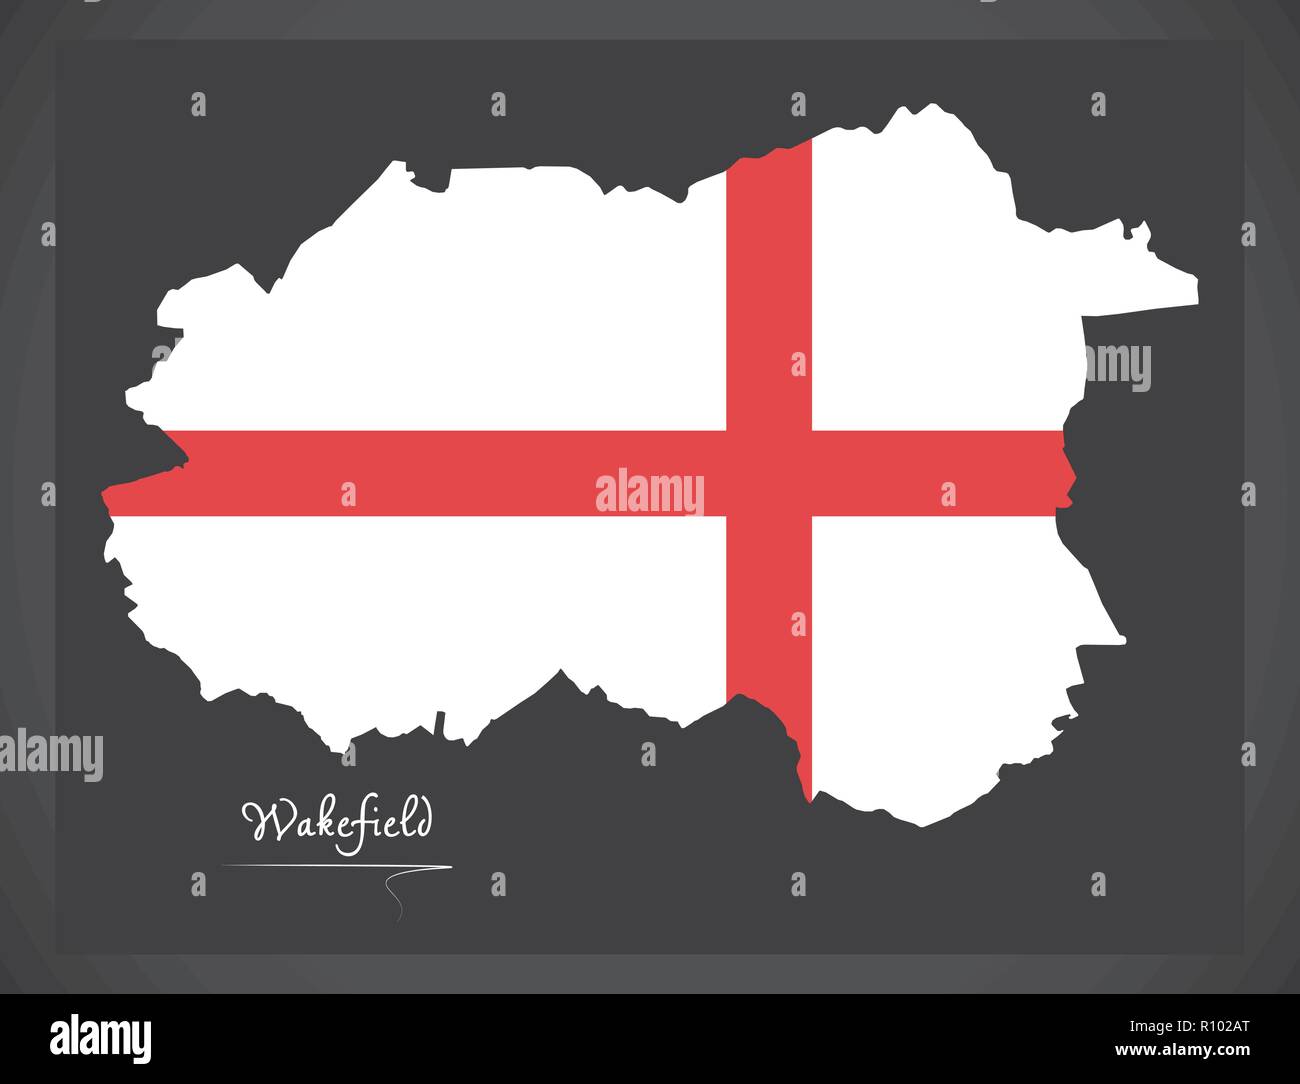 Wakefield City map with English national flag illustration Stock Vector